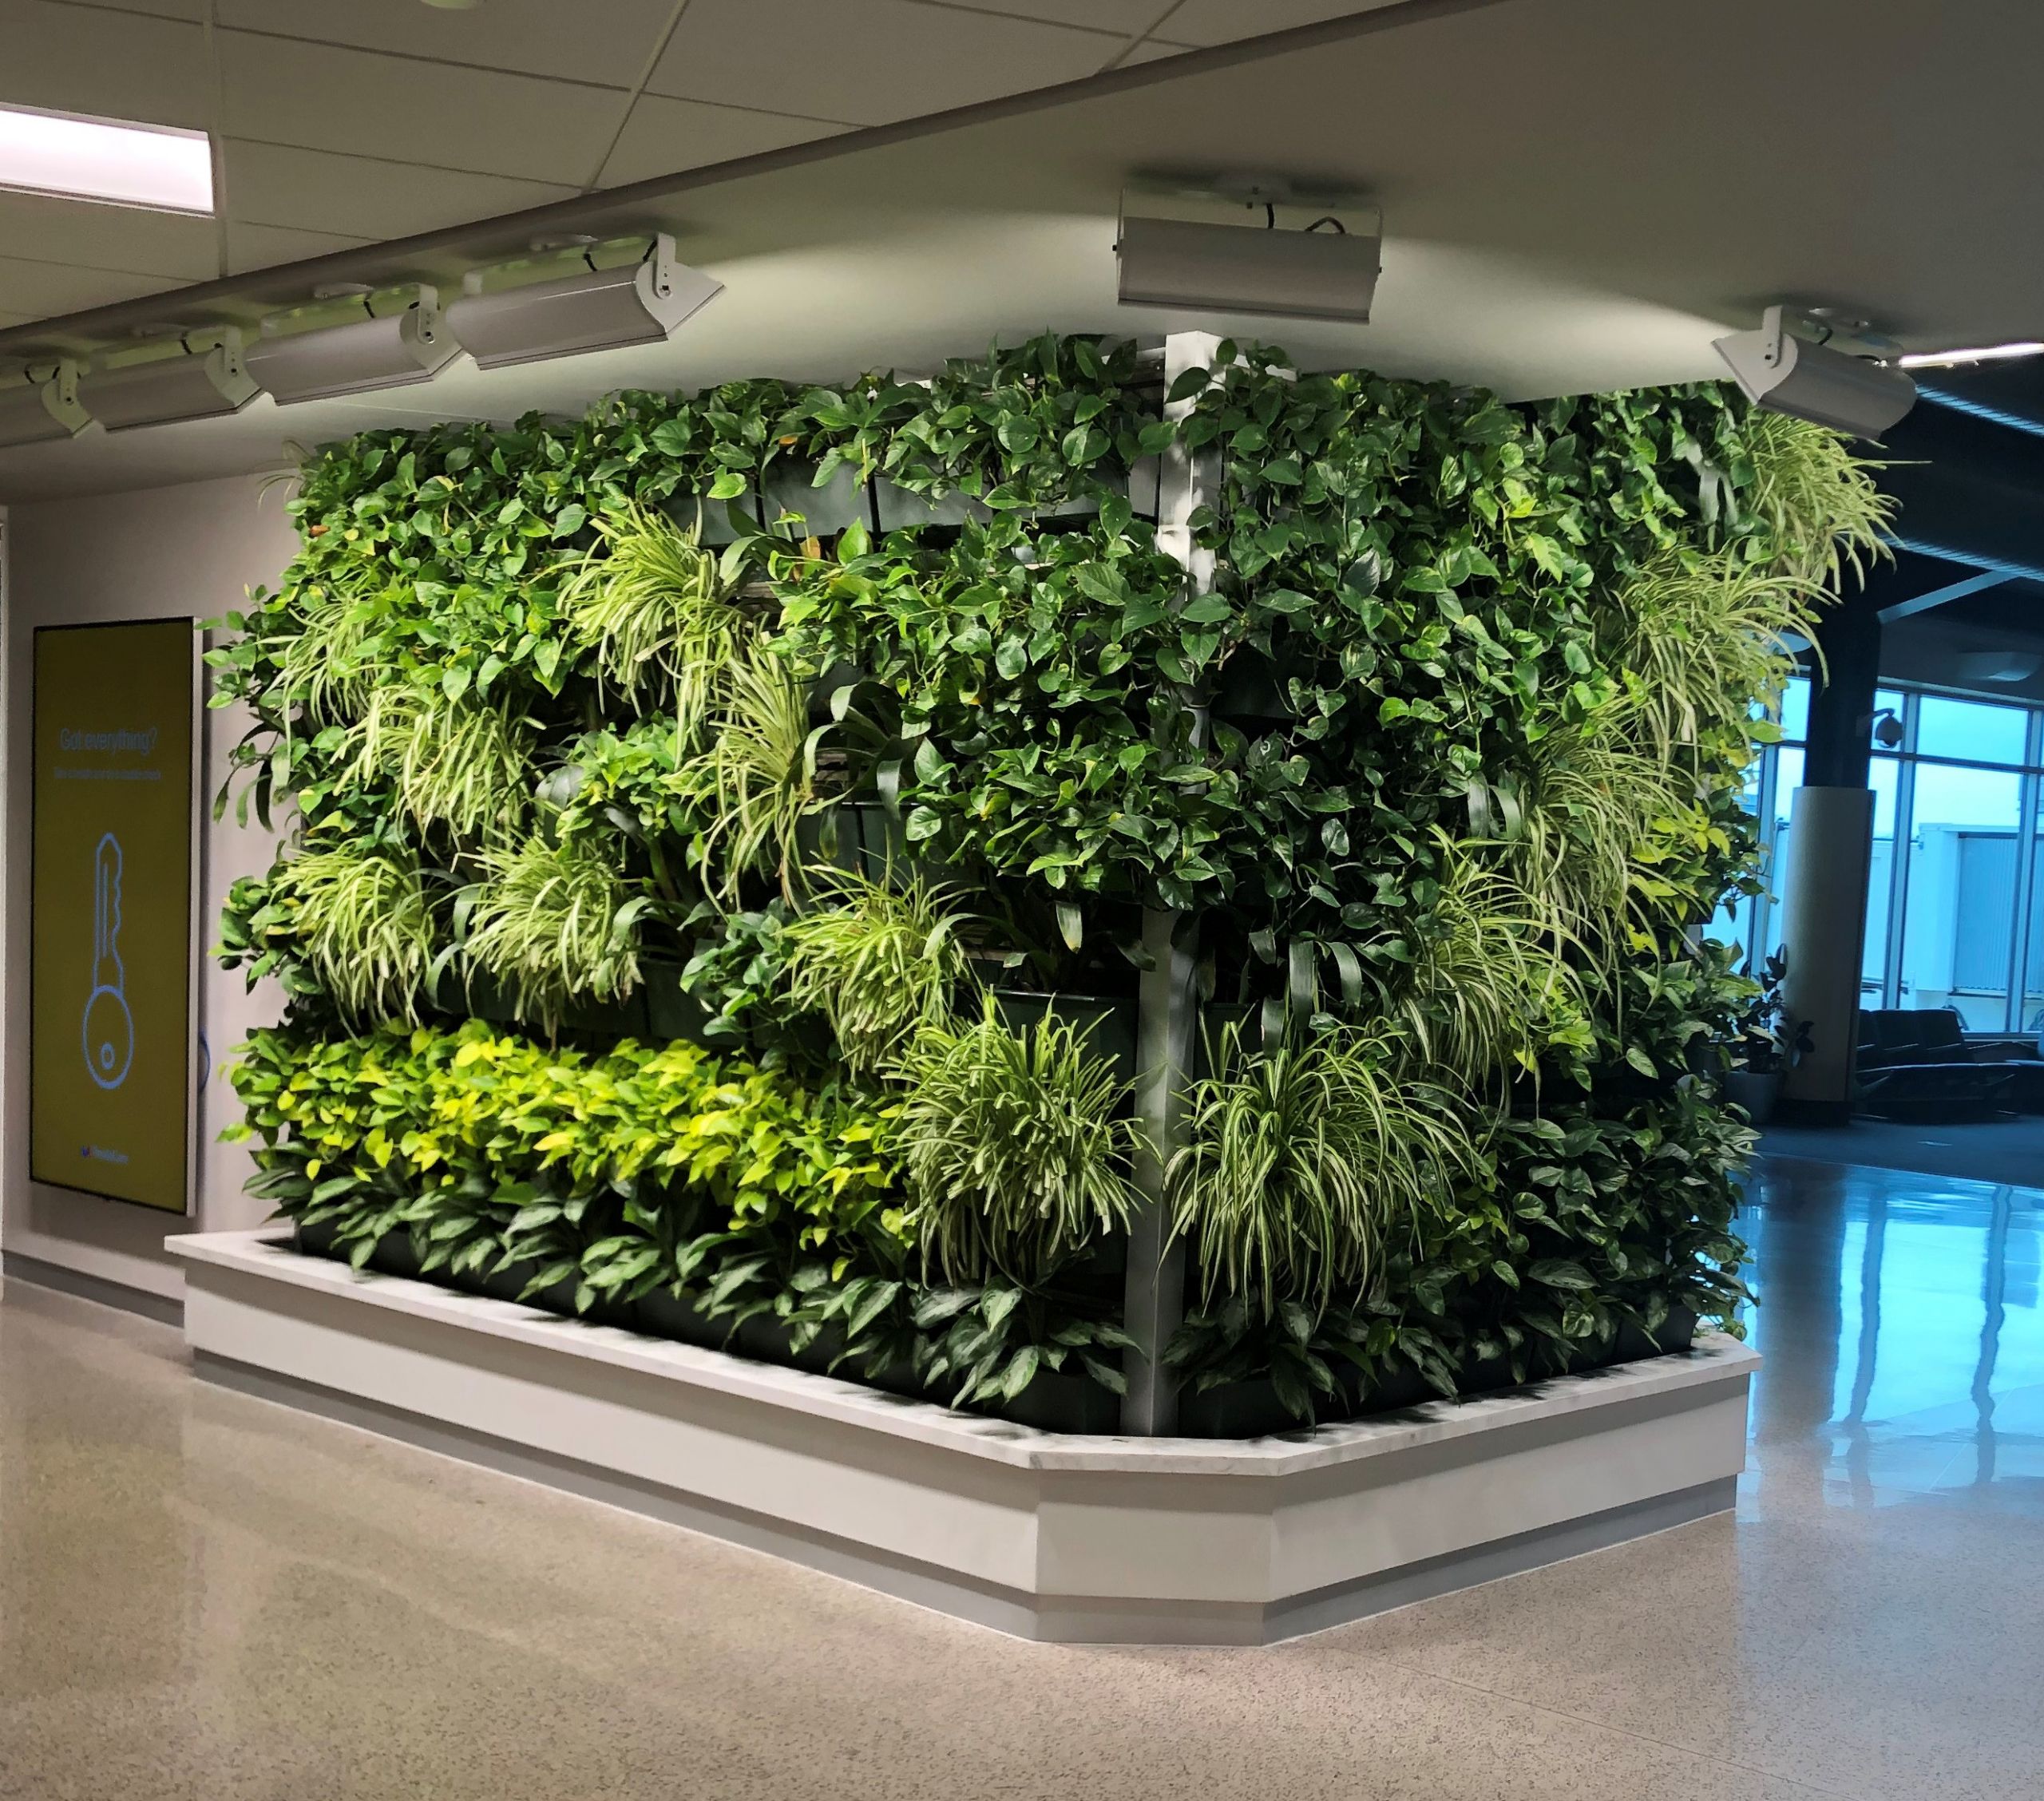 Living Wall Indoor
 LiveWall Living Wall Brings Natural Beauty and Calm to the